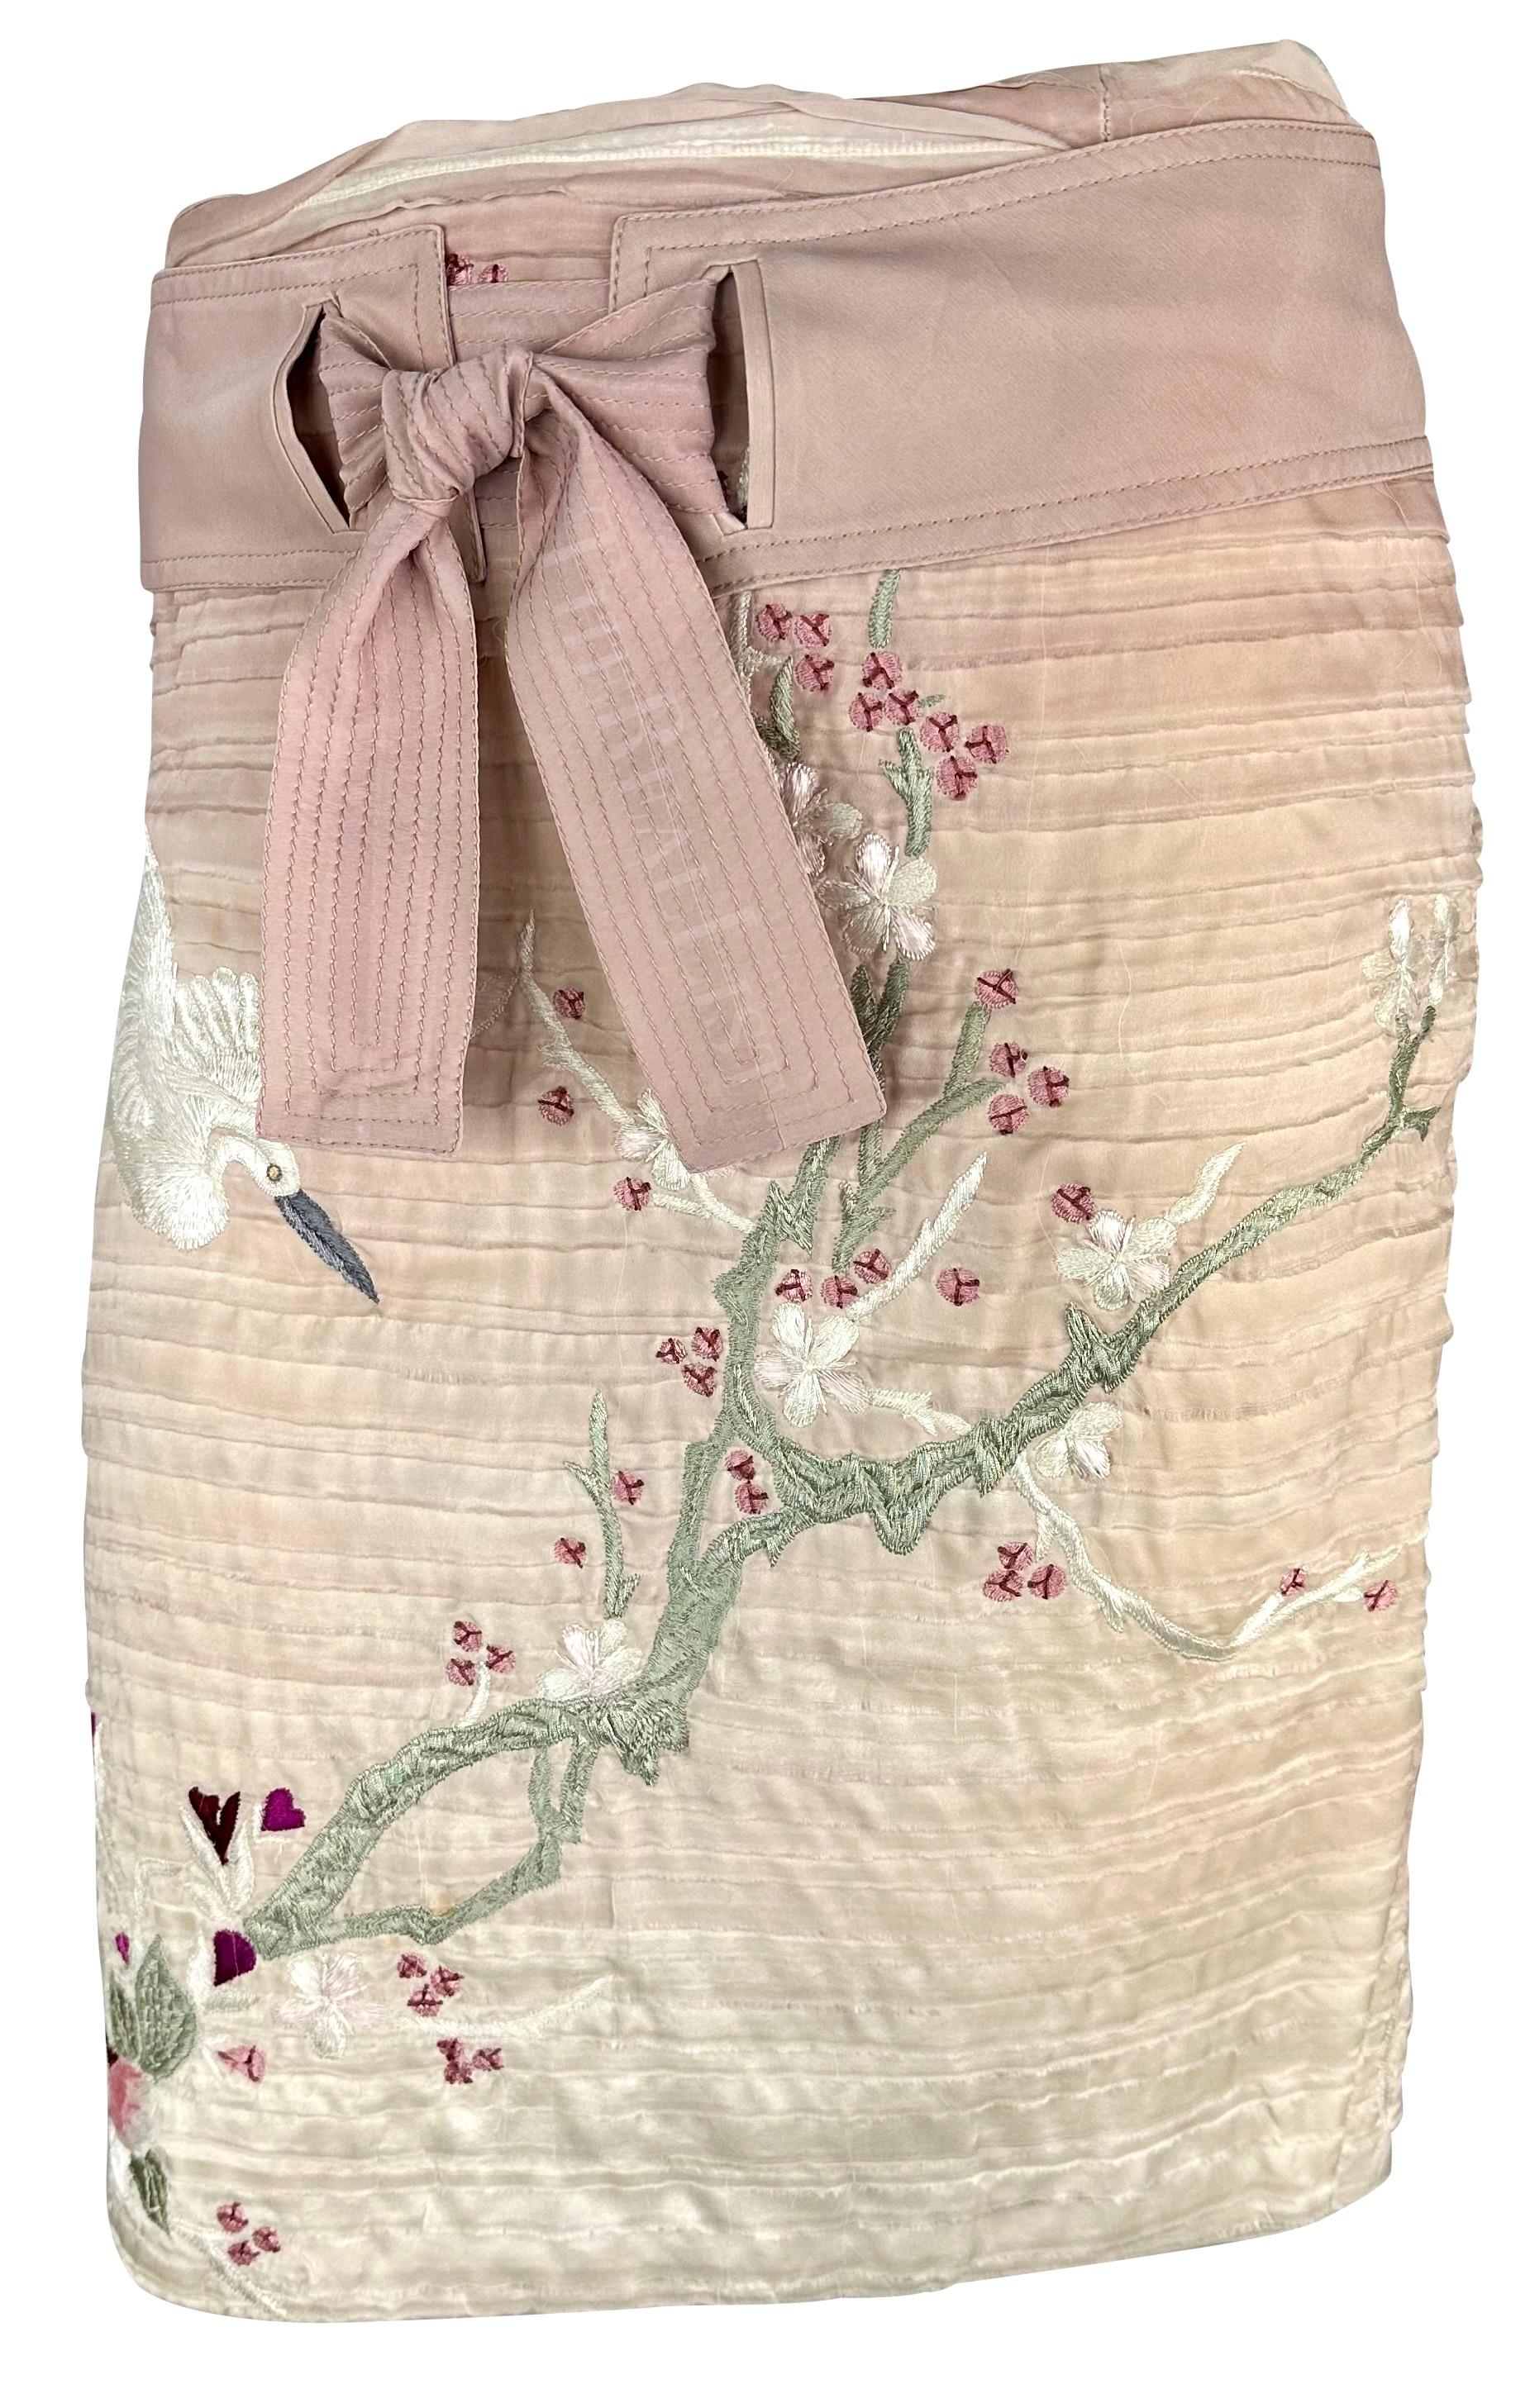 S/S 2003 Gucci by Tom Ford  Light Pink Cherry Blossom Embroidered Mini Skirt In Good Condition For Sale In West Hollywood, CA